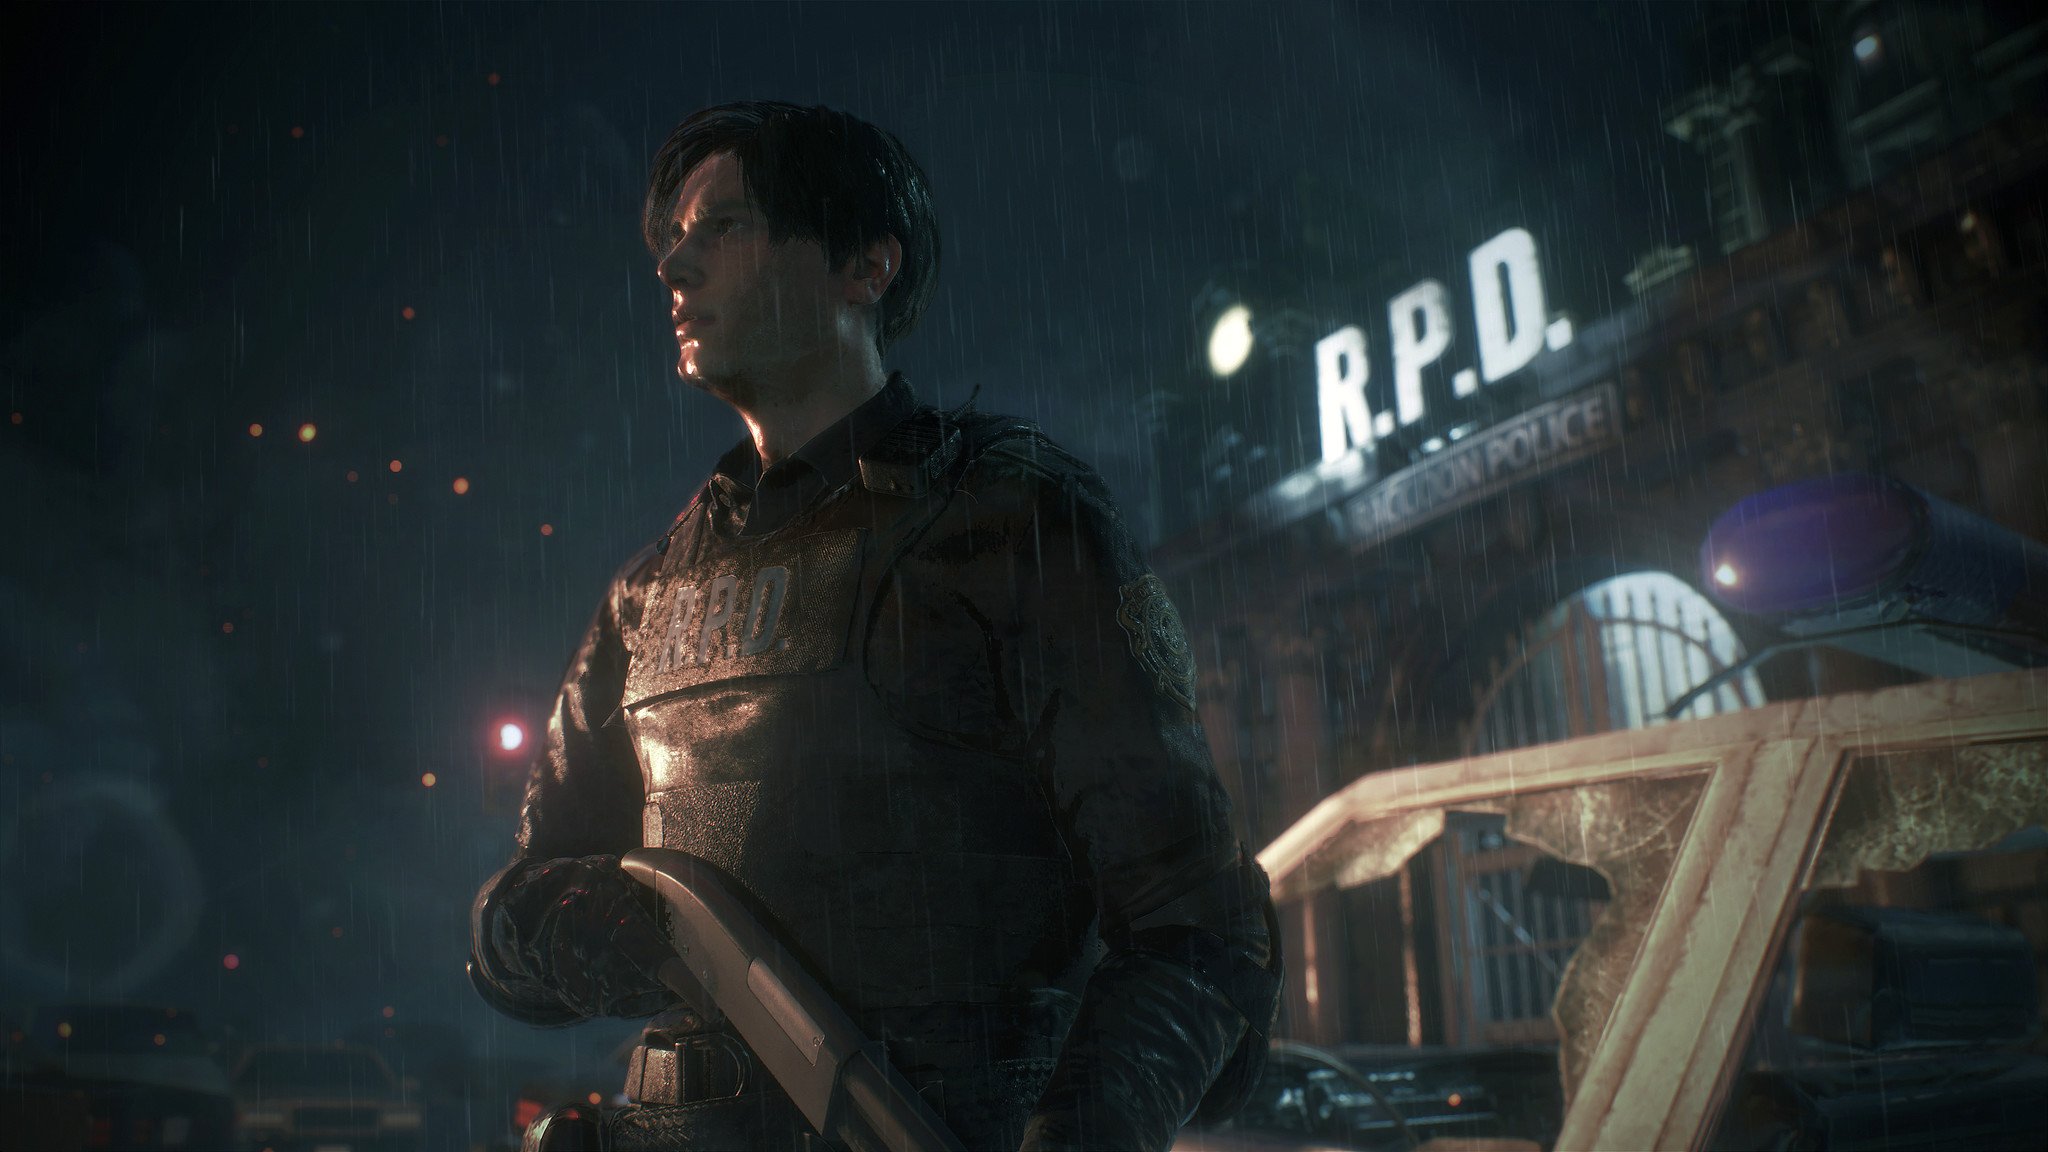 Resident Evil 2 Remake PS4, Xbox One preview - Release date can't come soon  enough, Gaming, Entertainment